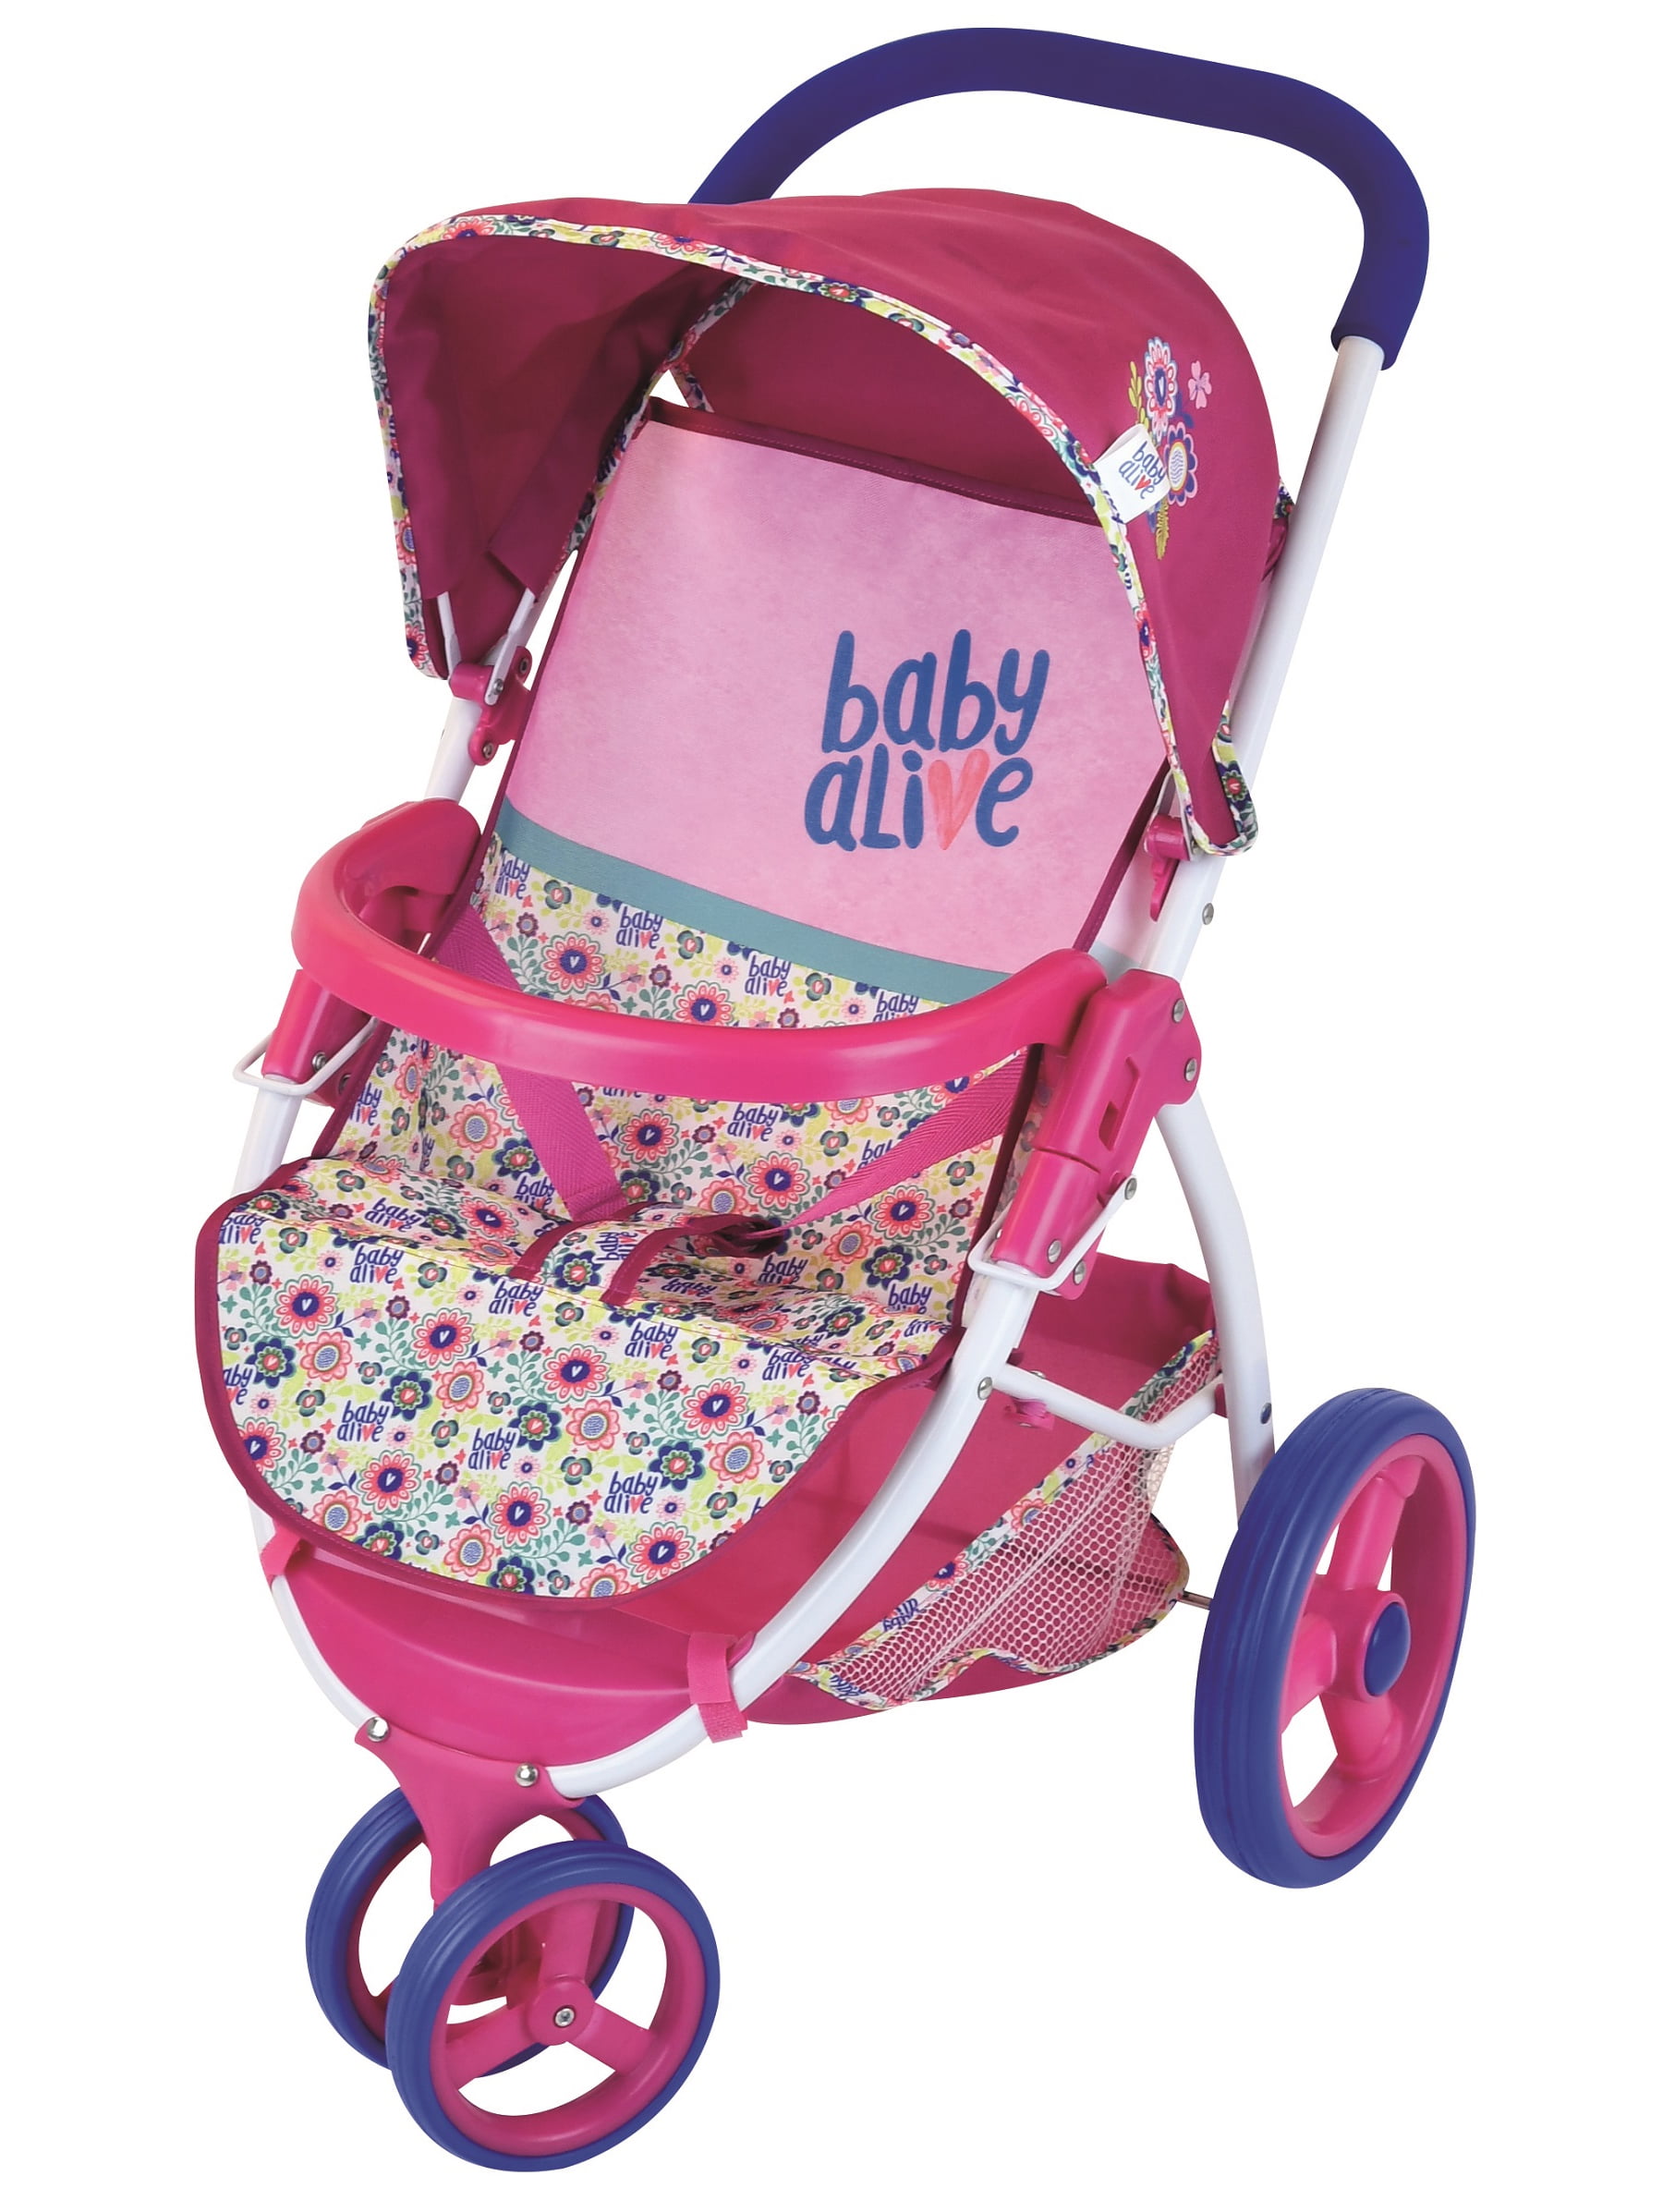 Precious Toys Pink Pink Handles Silver Frame White Polka Dots Doll Stroller 